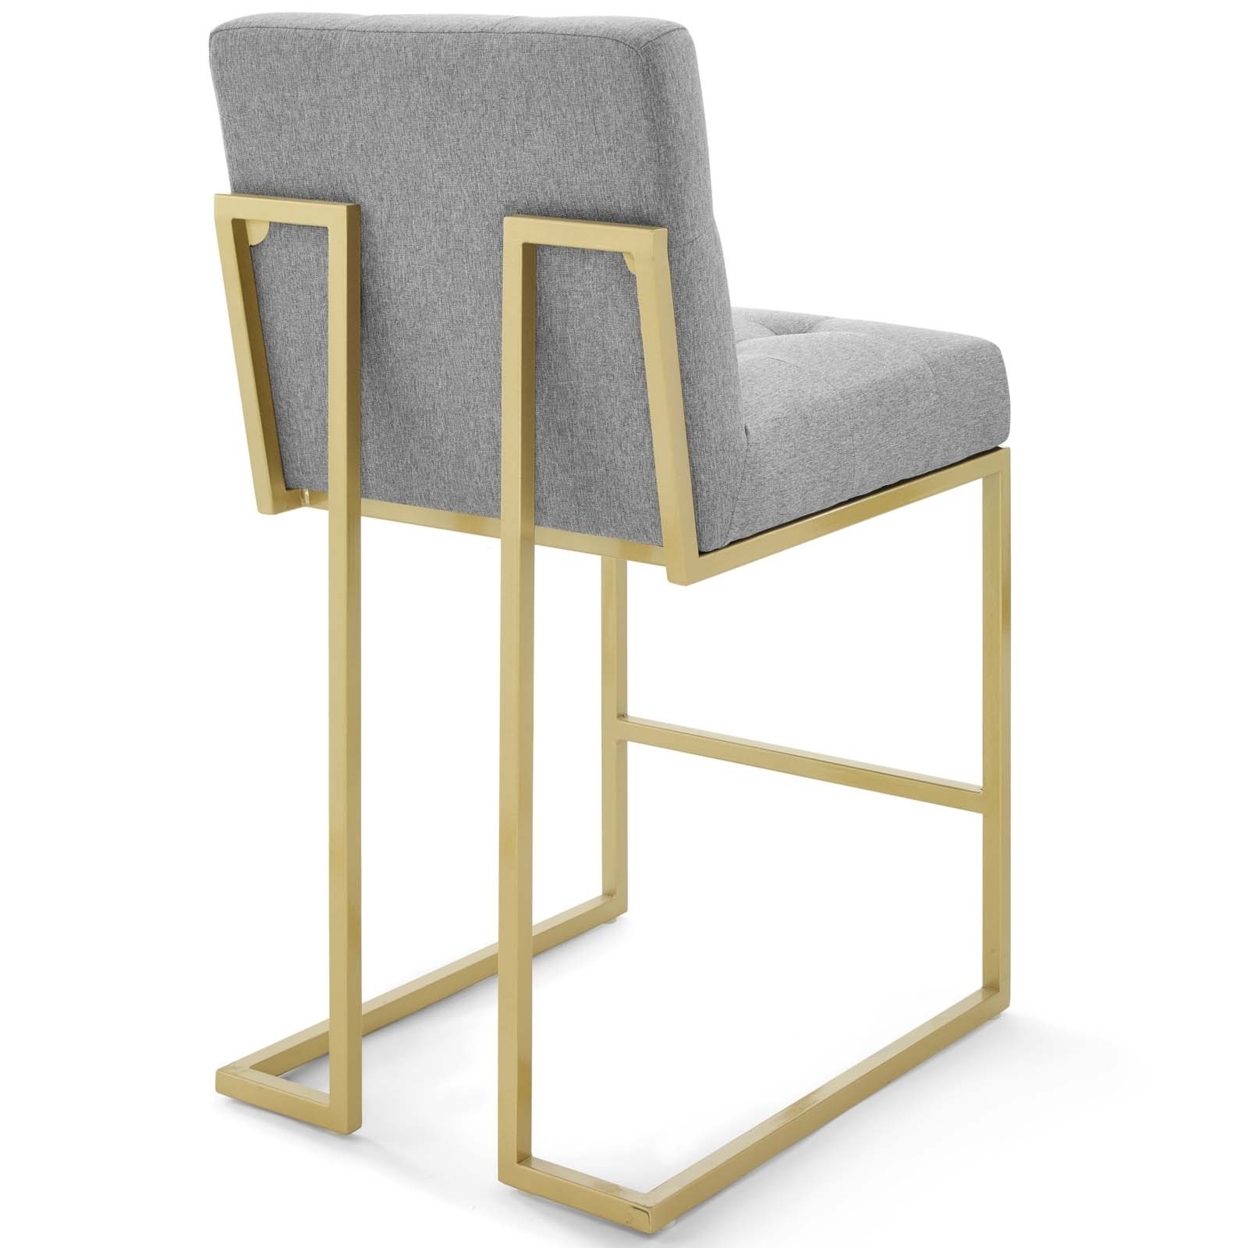 Privy Gold Stainless Steel Upholstered Fabric Counter Stool Set Of 2,Gold Light Gray